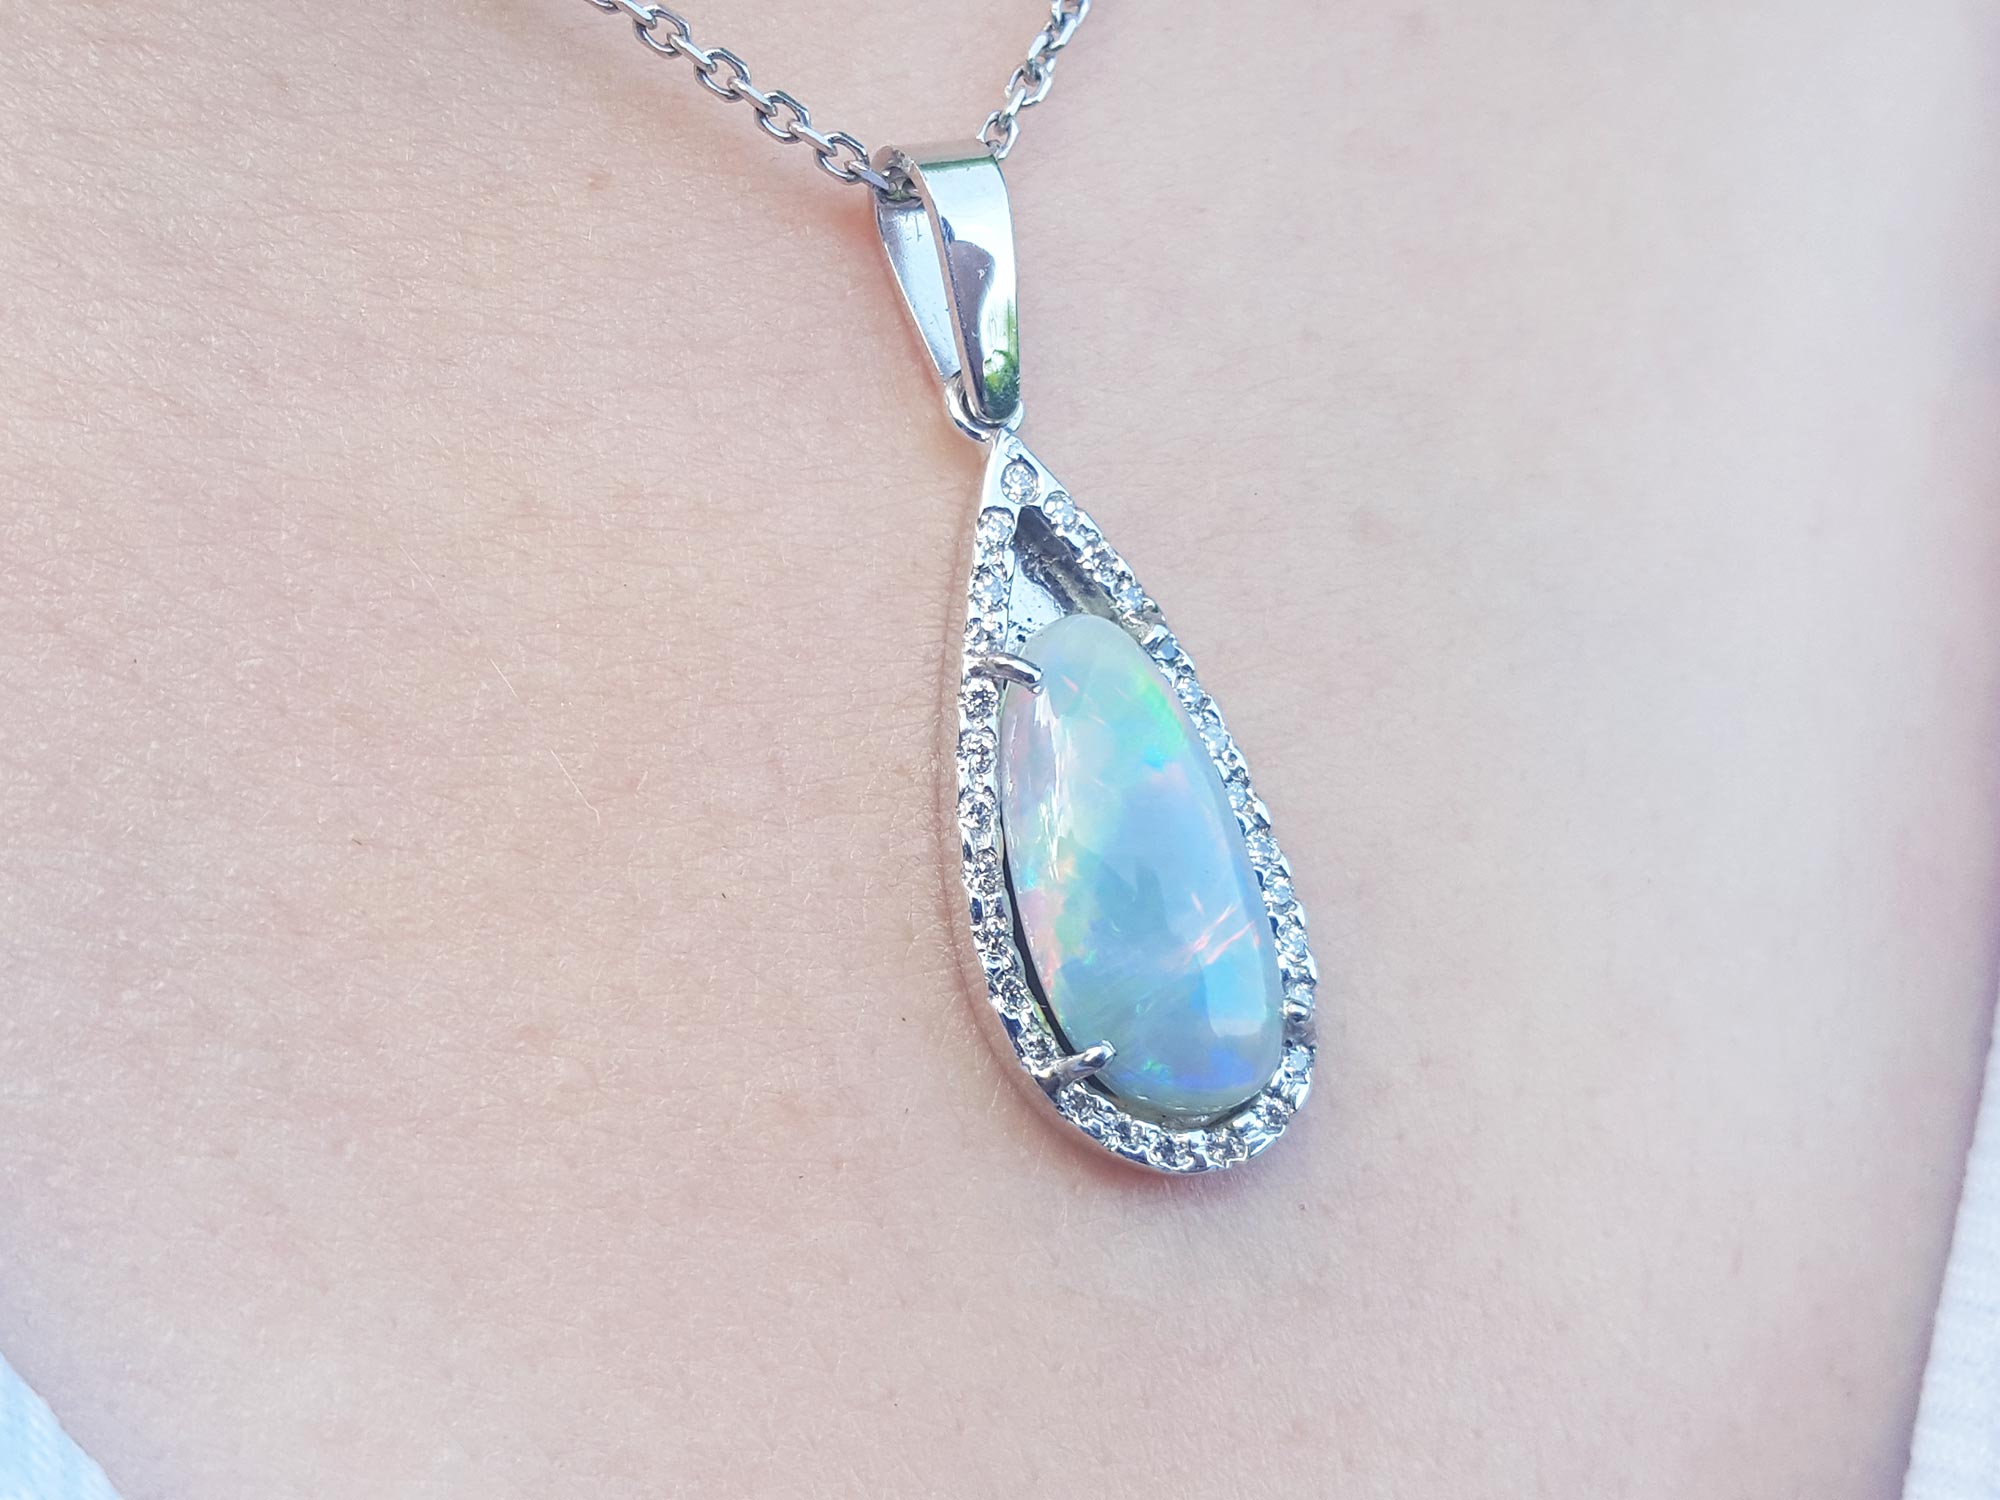 Pear shaped opal necklace